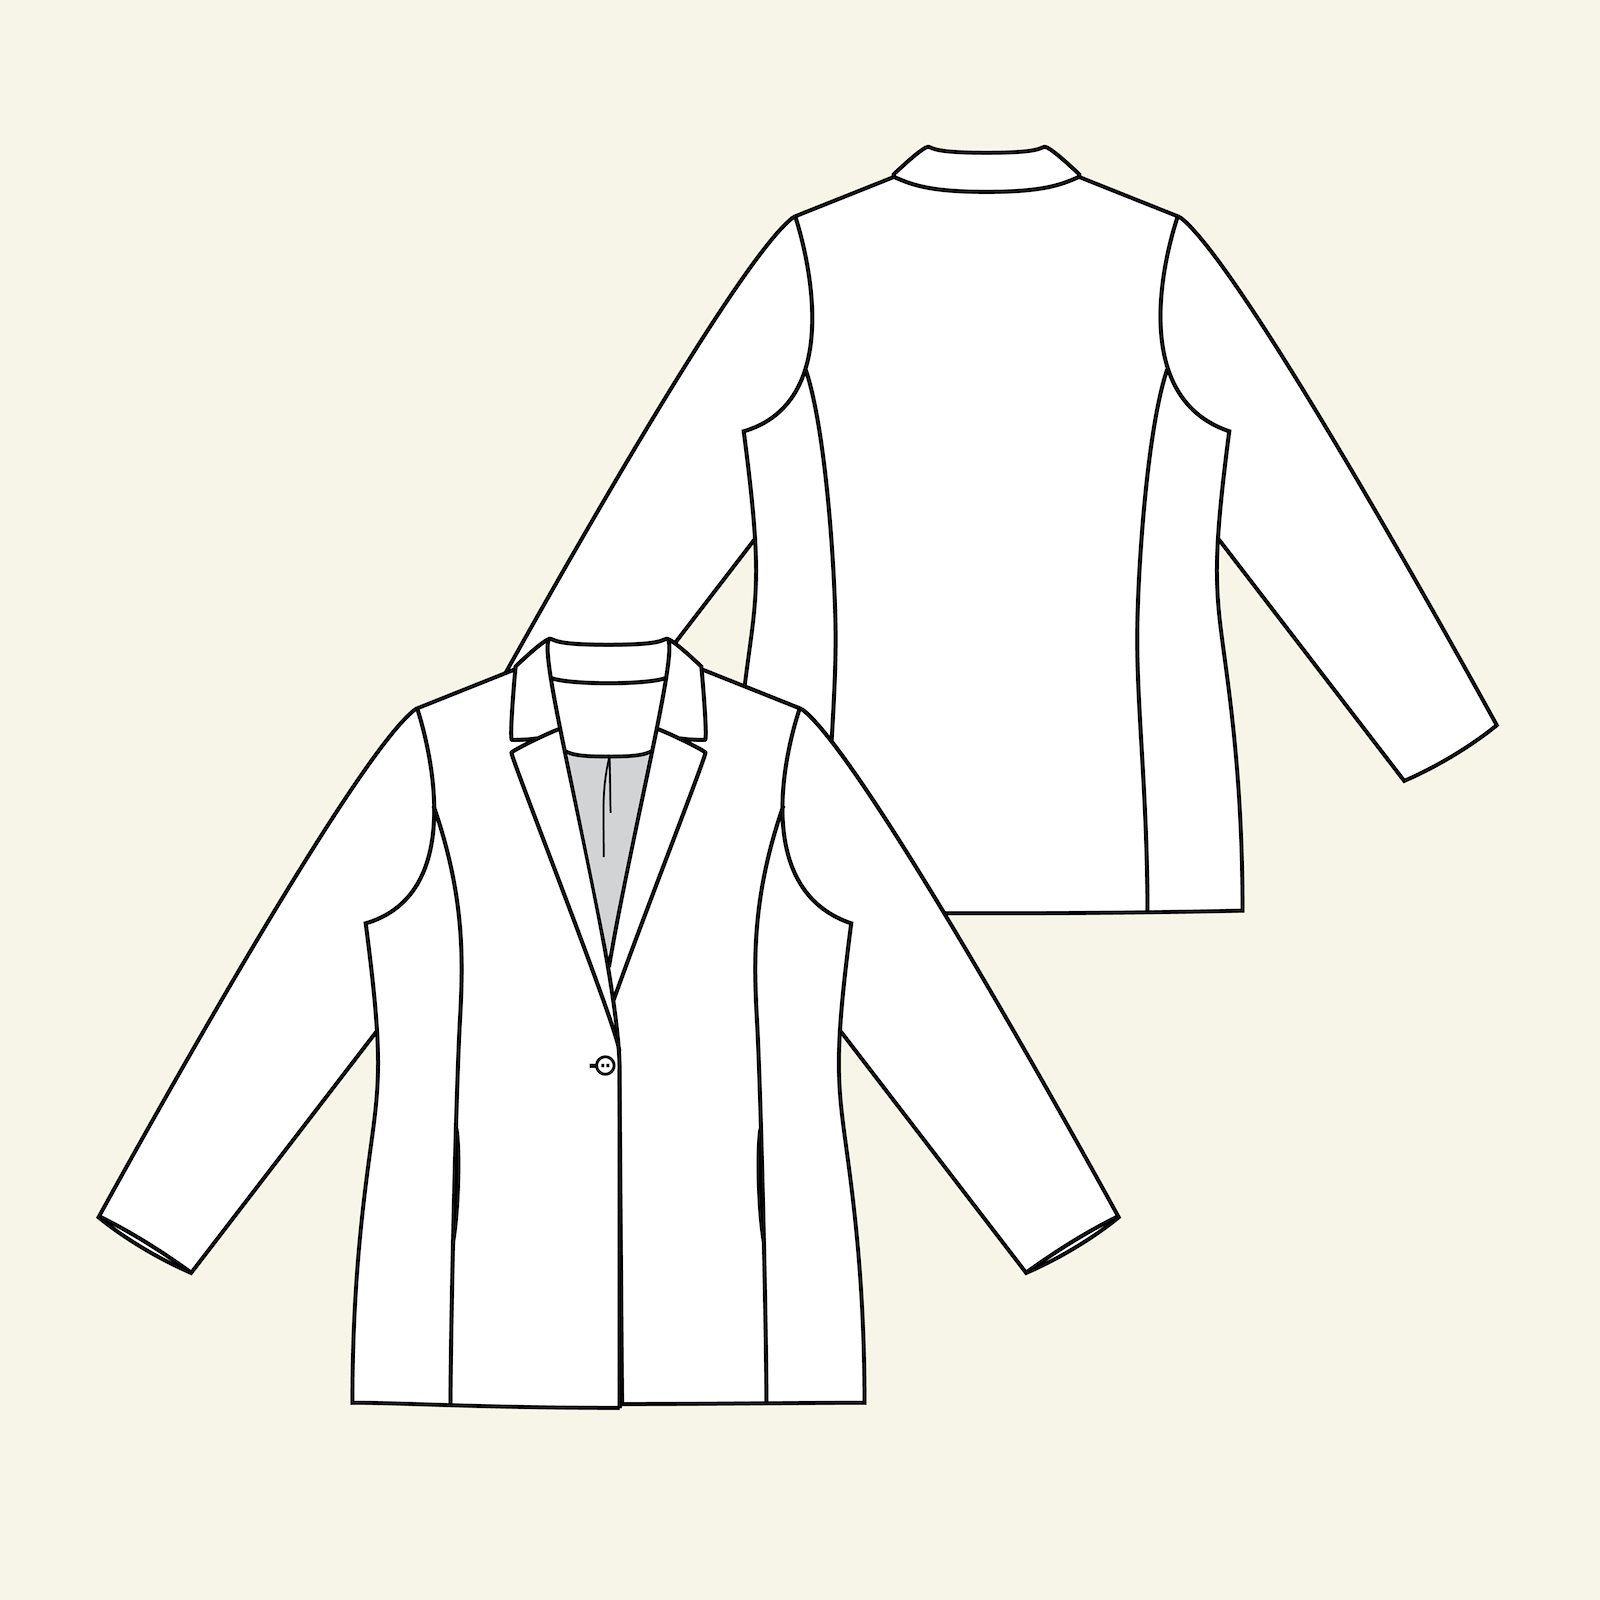 Suit jacket with lining, 38/10 p24048_pack